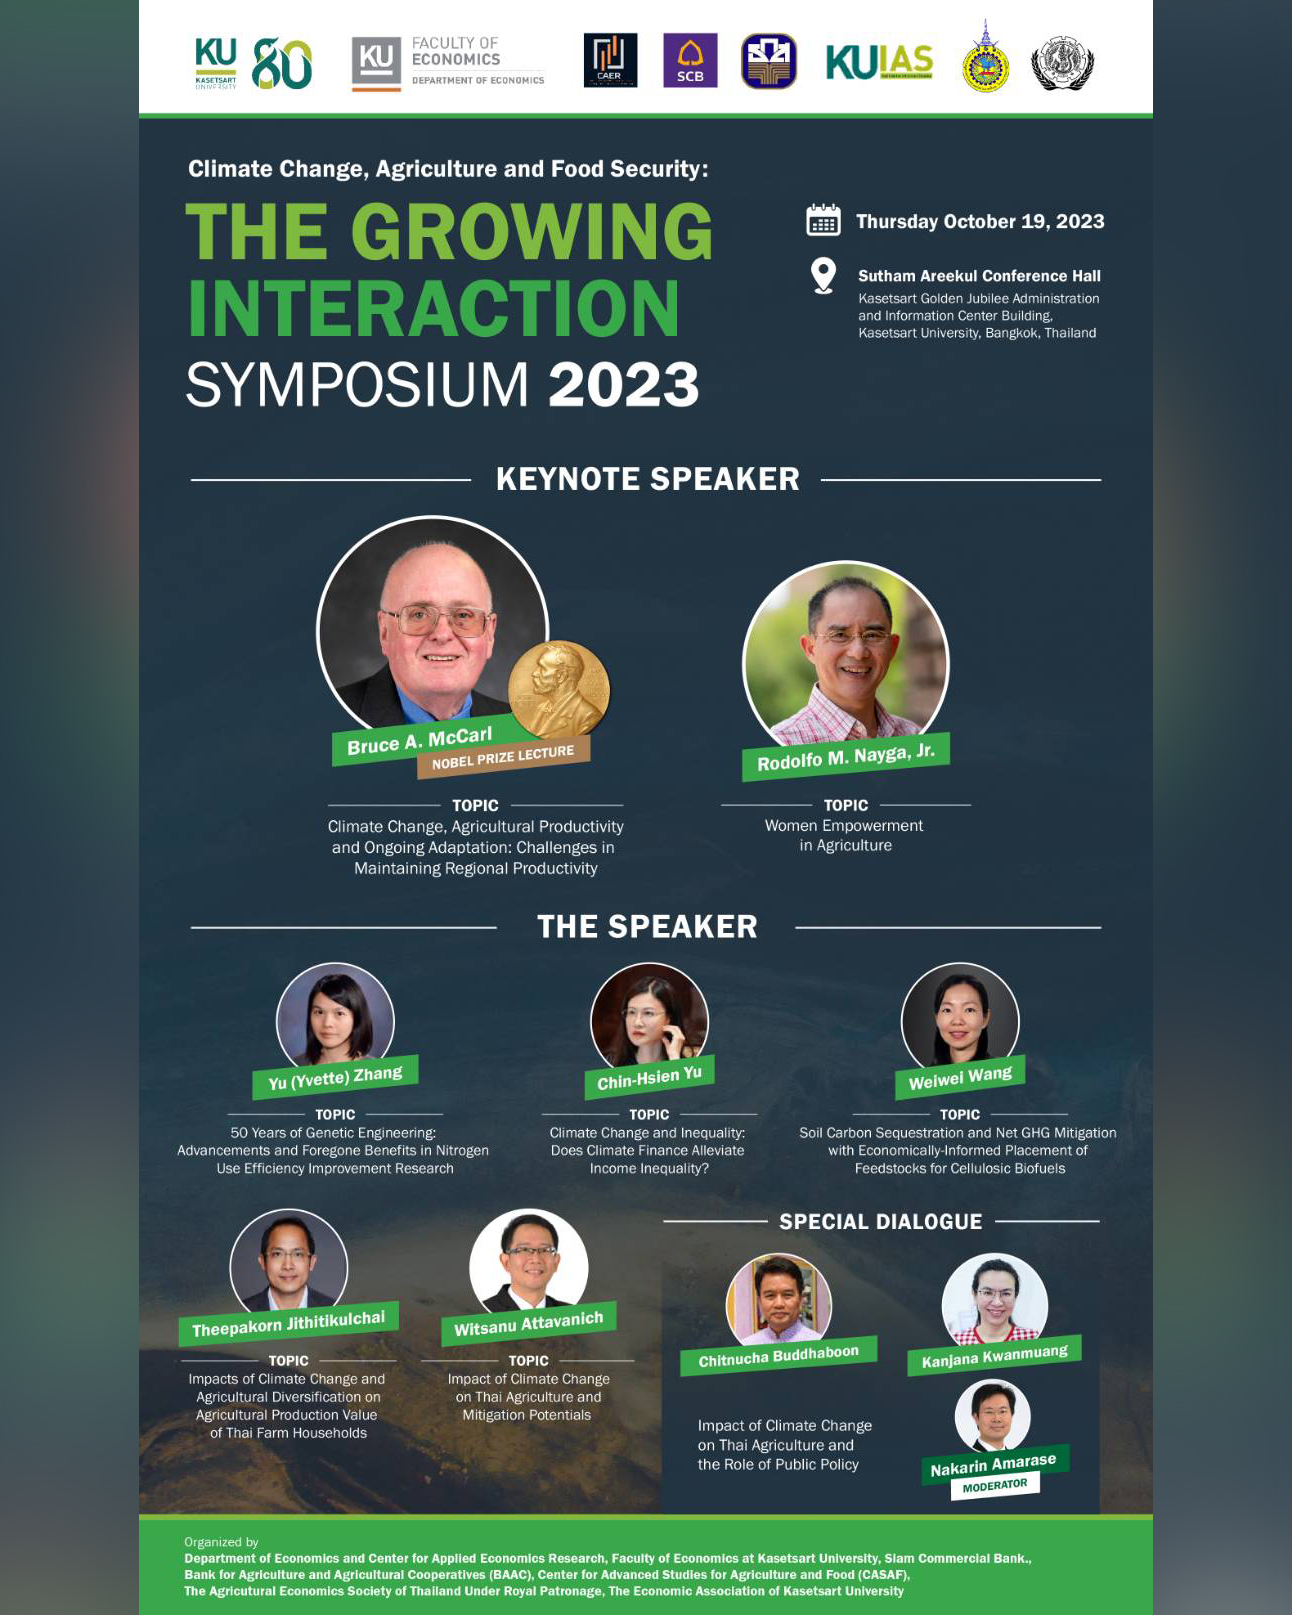 “Climate Change, Agriculture, and Food Security: The Growing Interaction” Symposium 2023